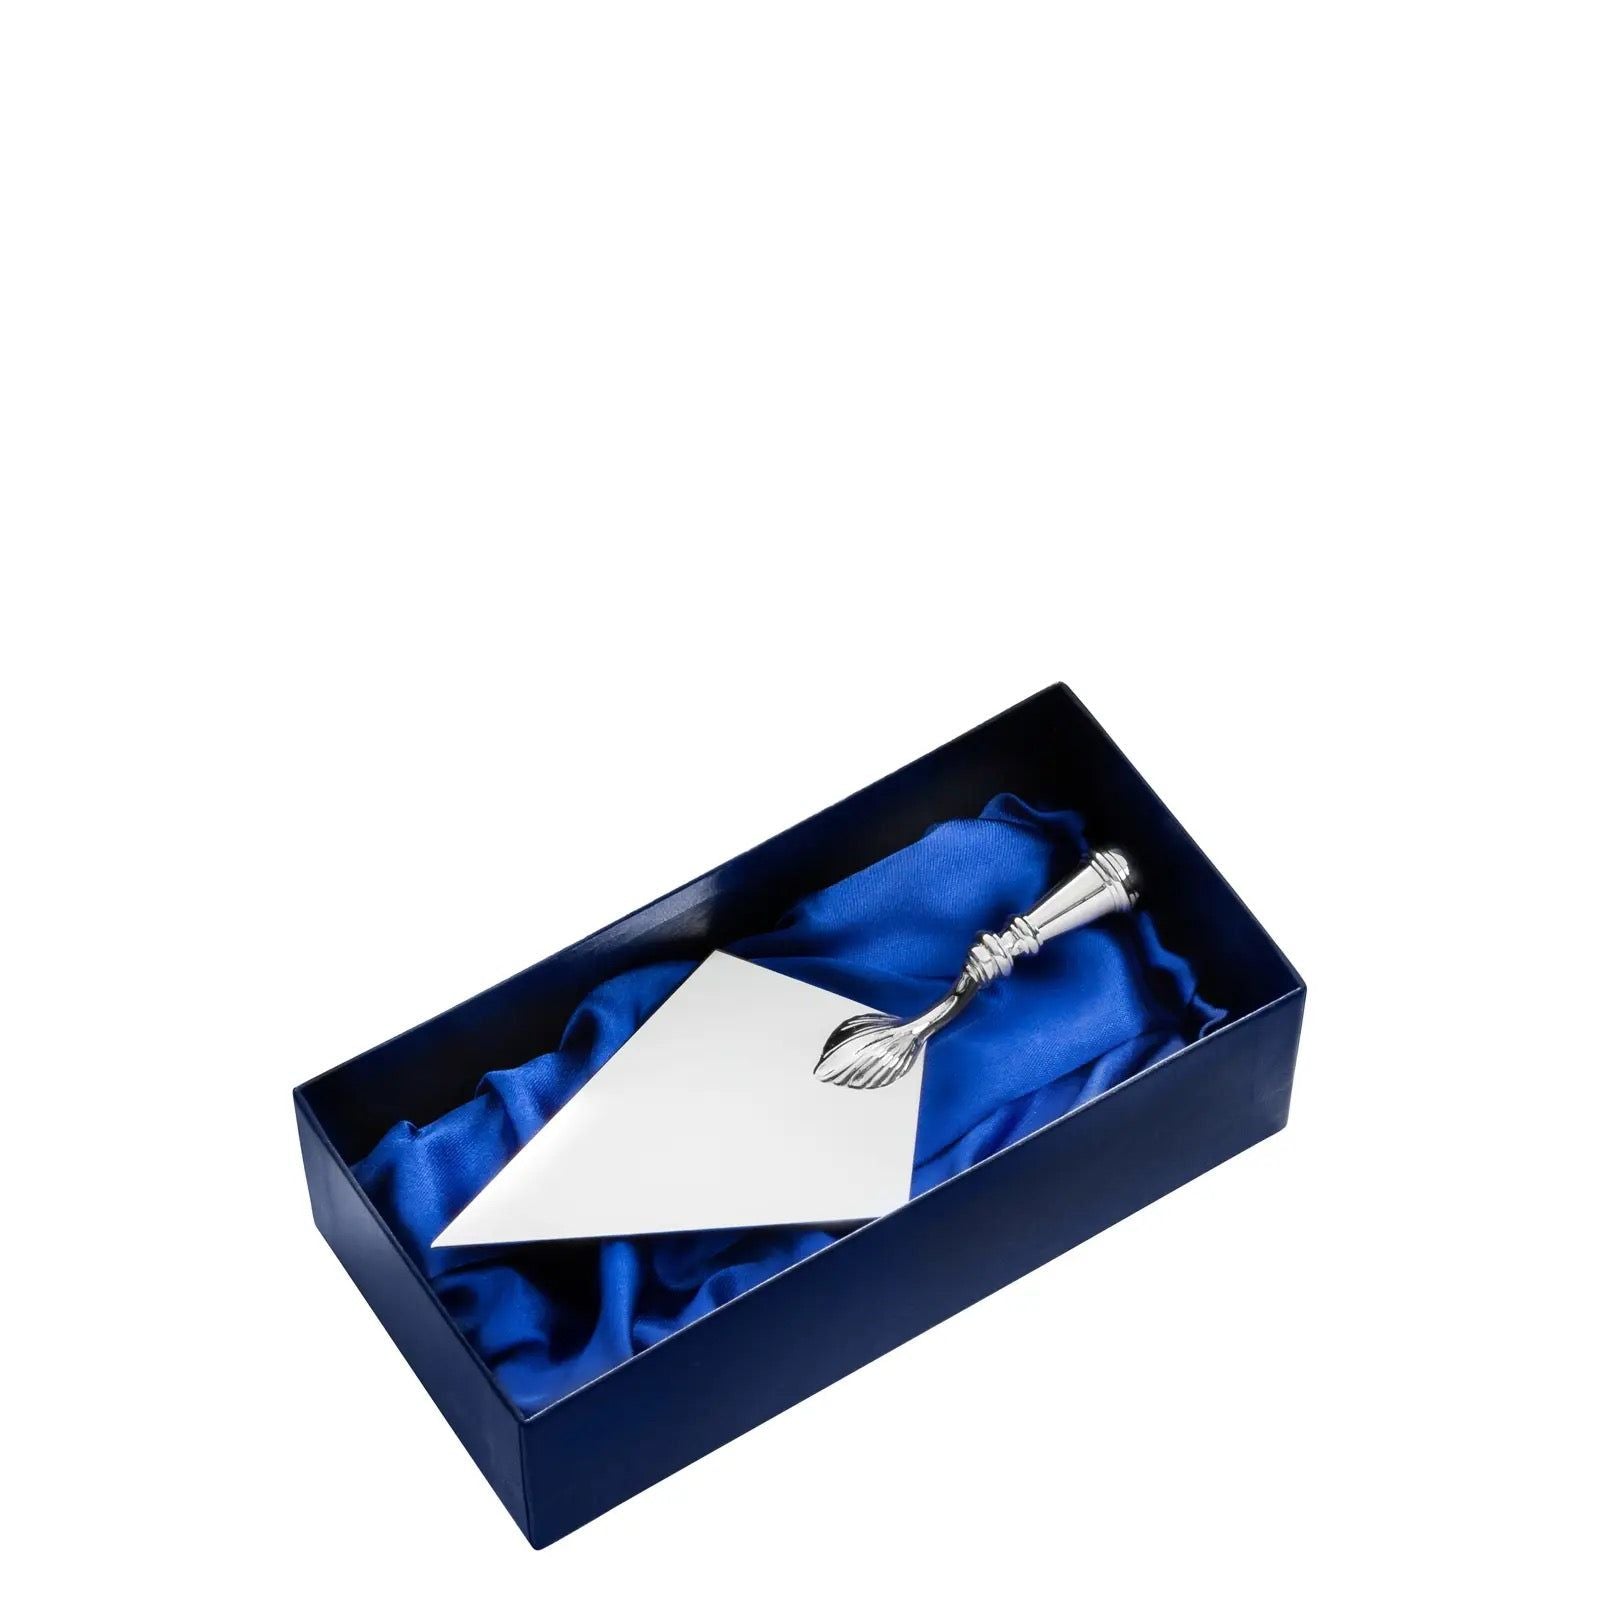 Silver Plated Presentation Trowel - With Box